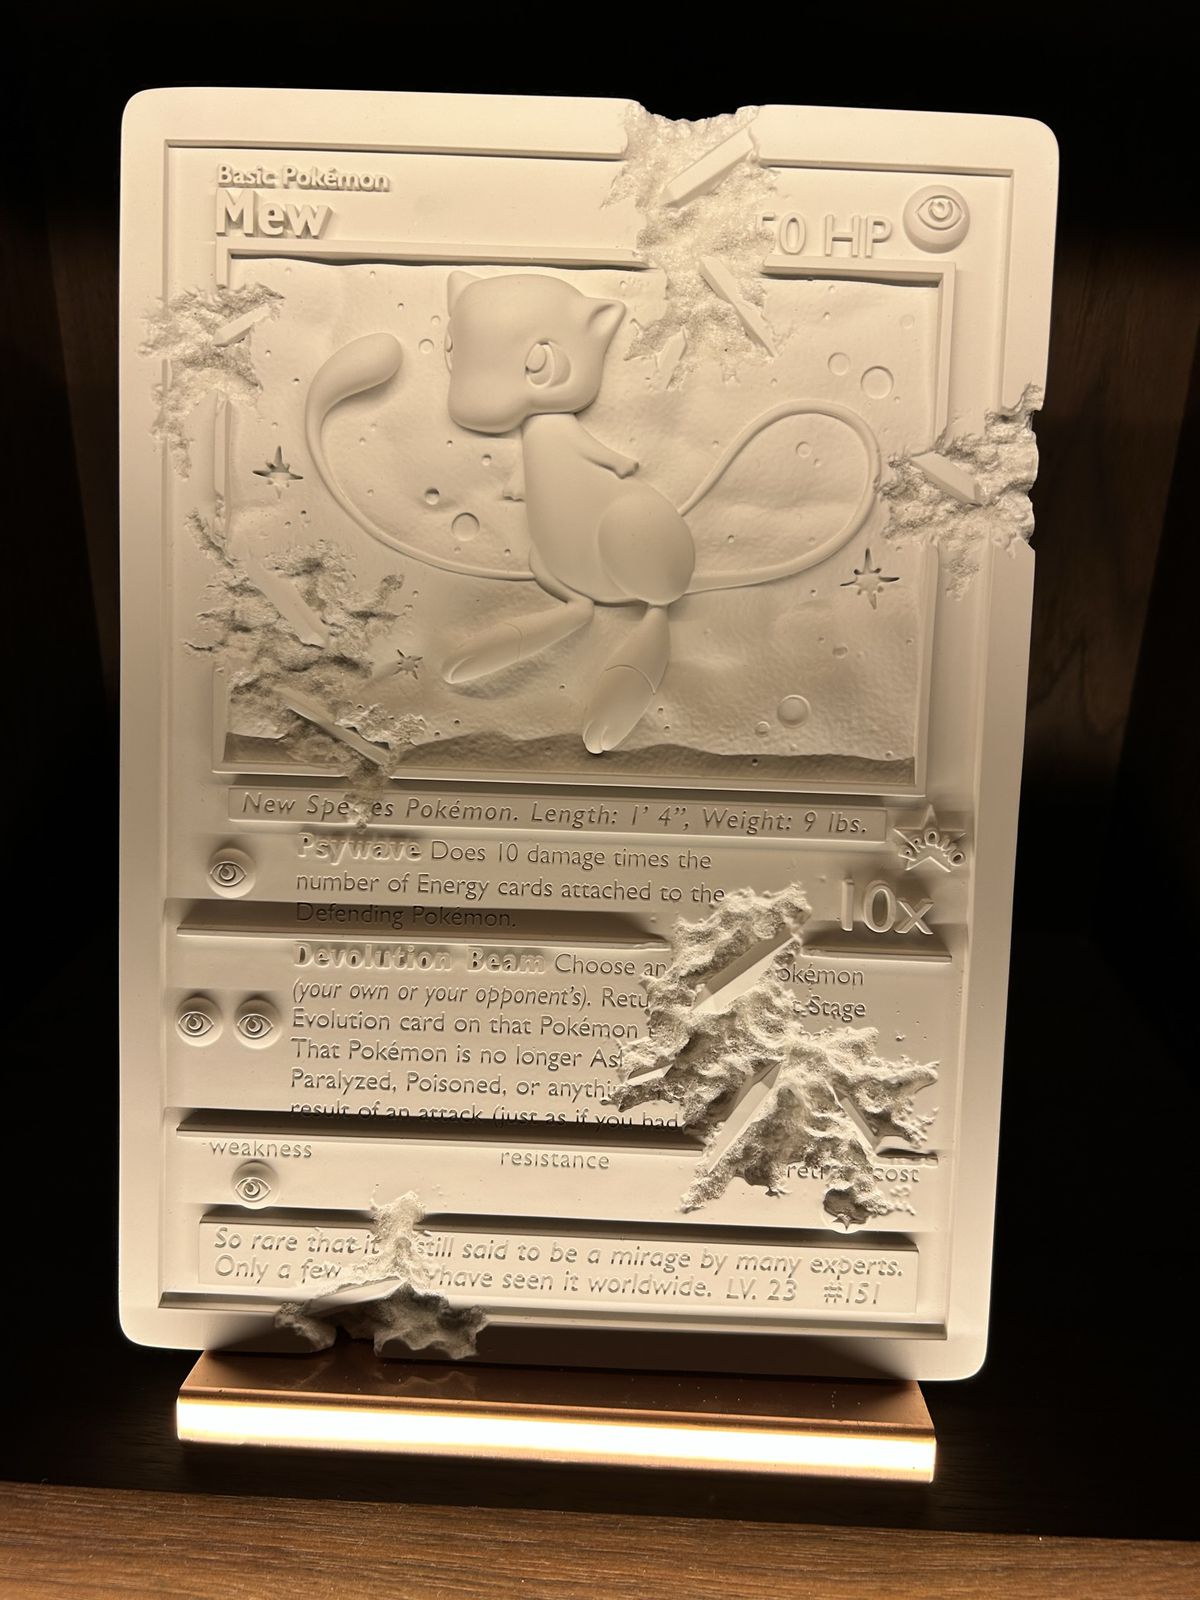 An art piece depicting a Mew Pokémon playing card, displayed at the Marufukuro in Kyoto